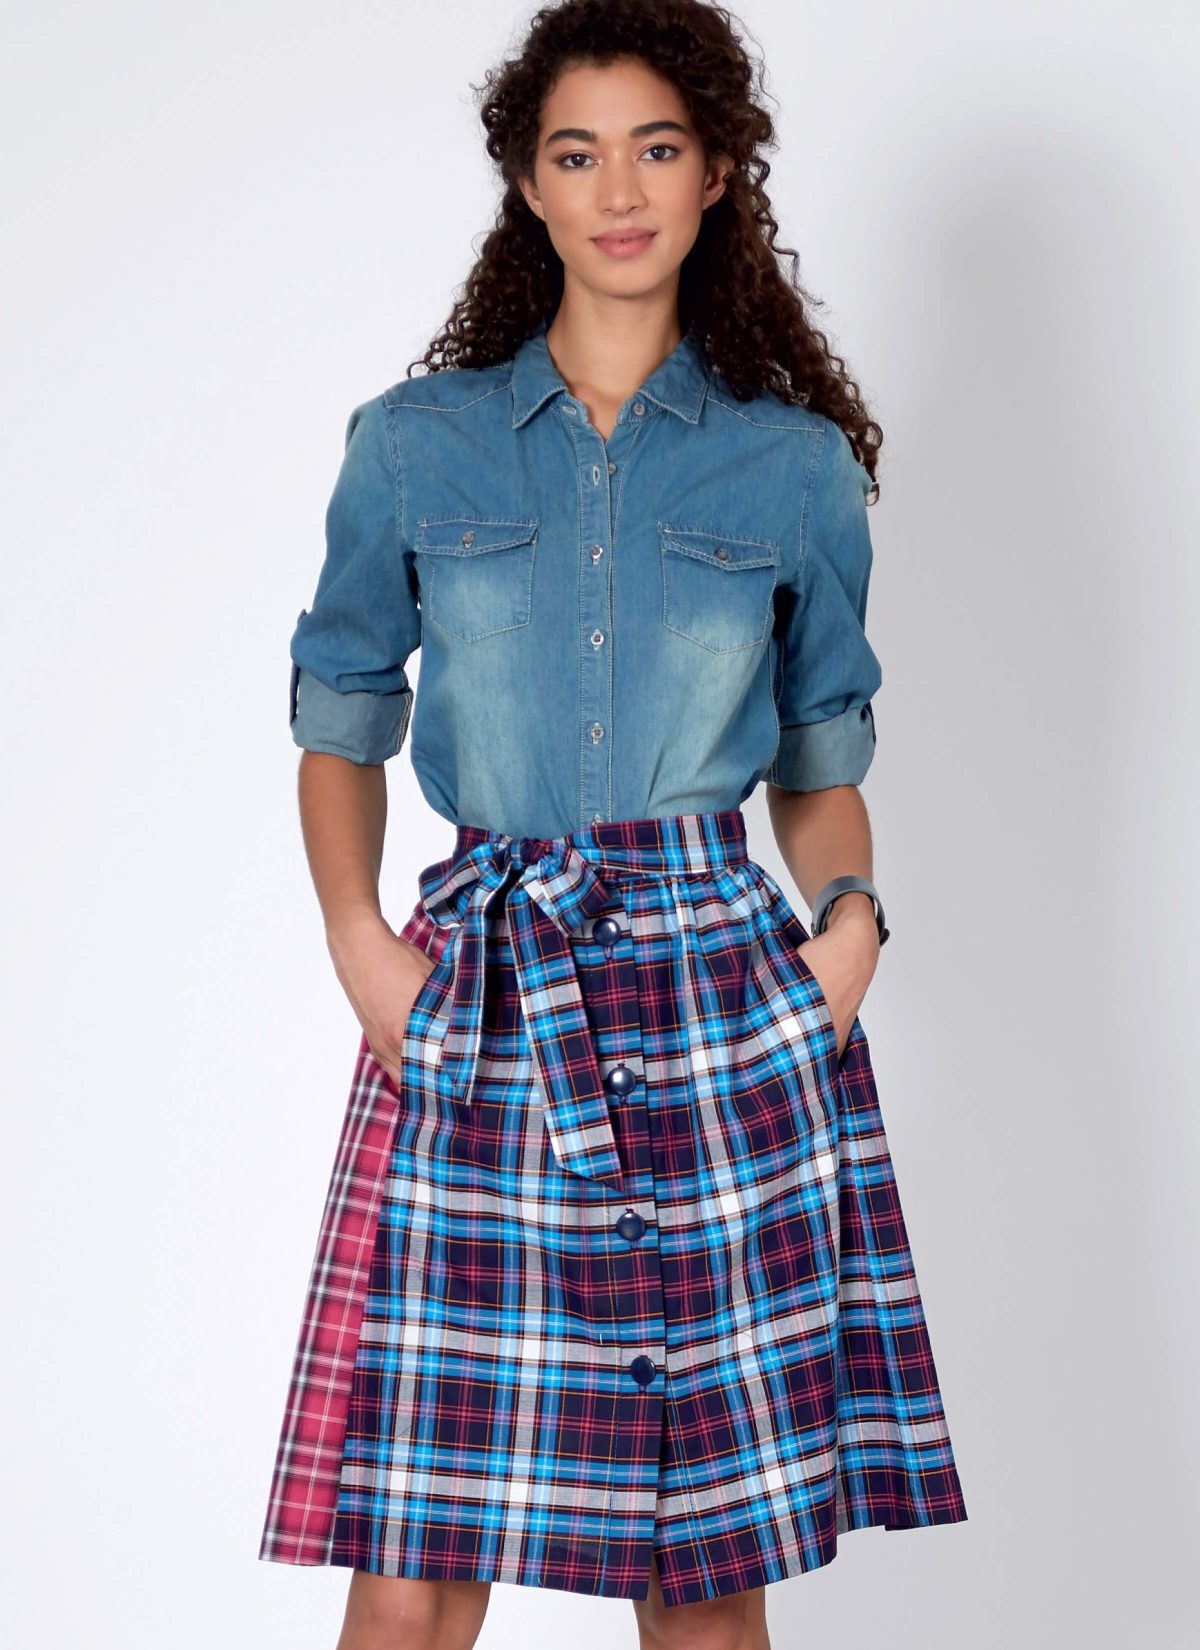 McCall's Sewing Pattern M7981 Misses' Skirts